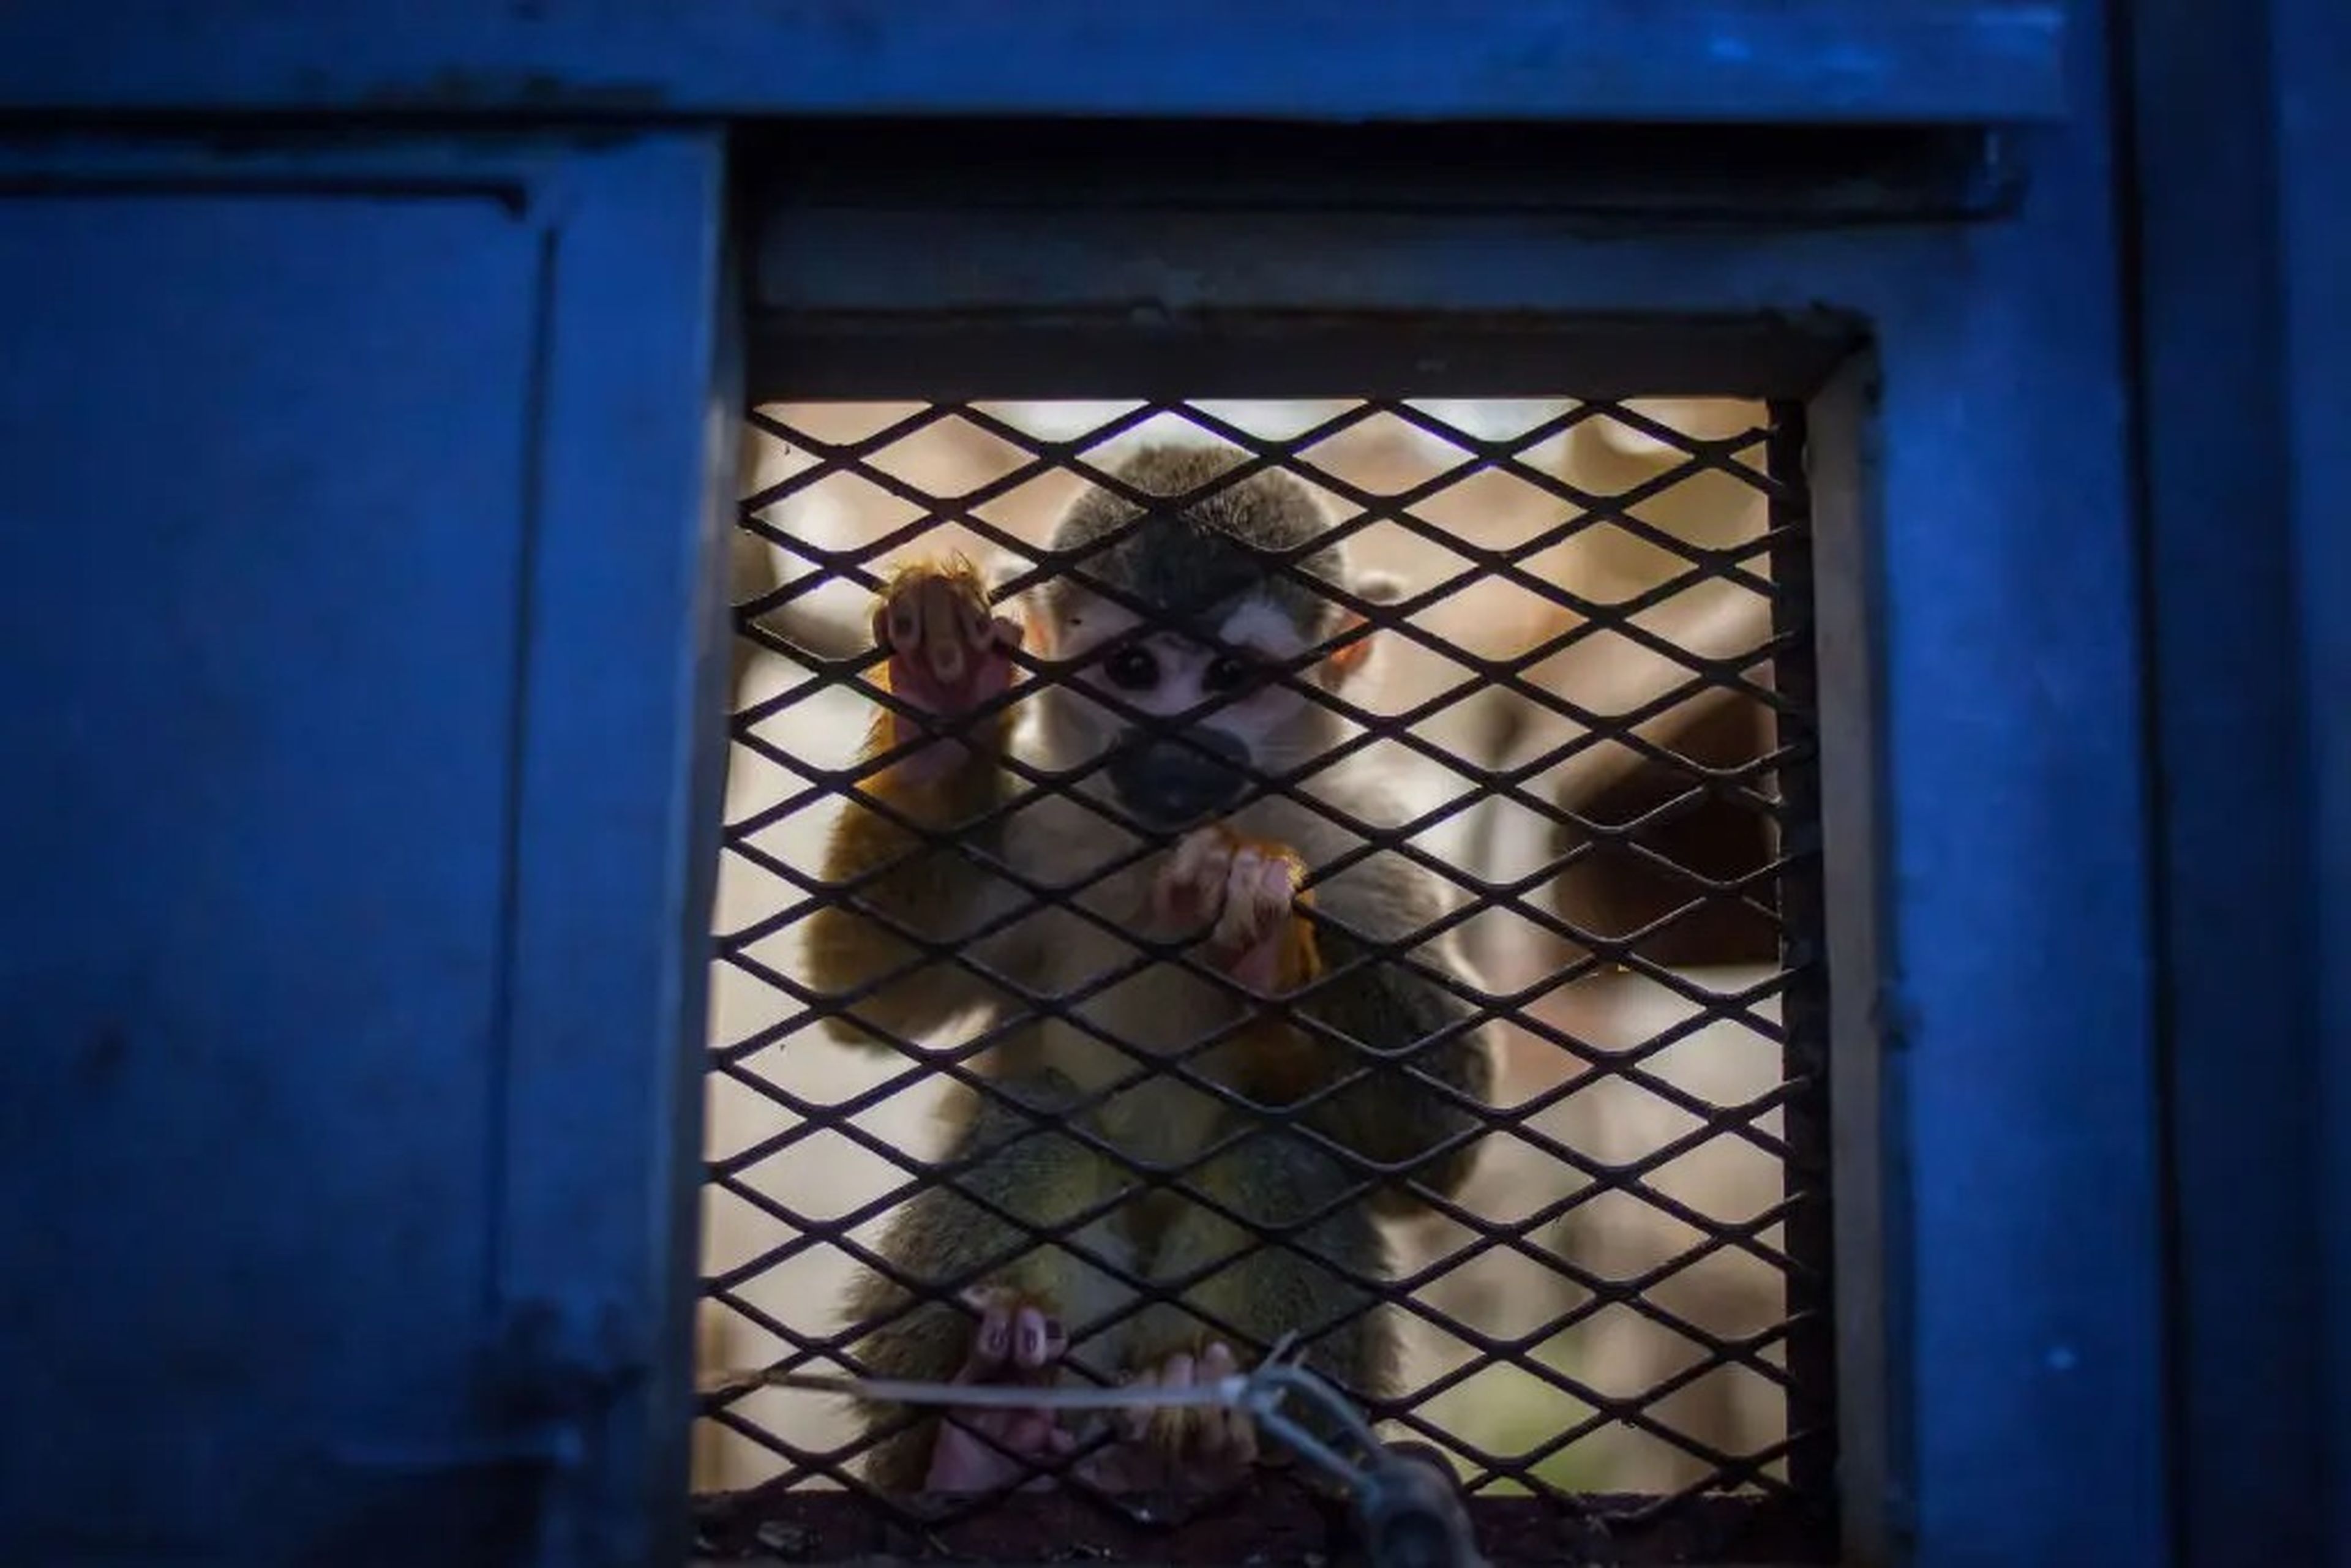 A squirrel monkey looks toward the camera from behind a metal cage.